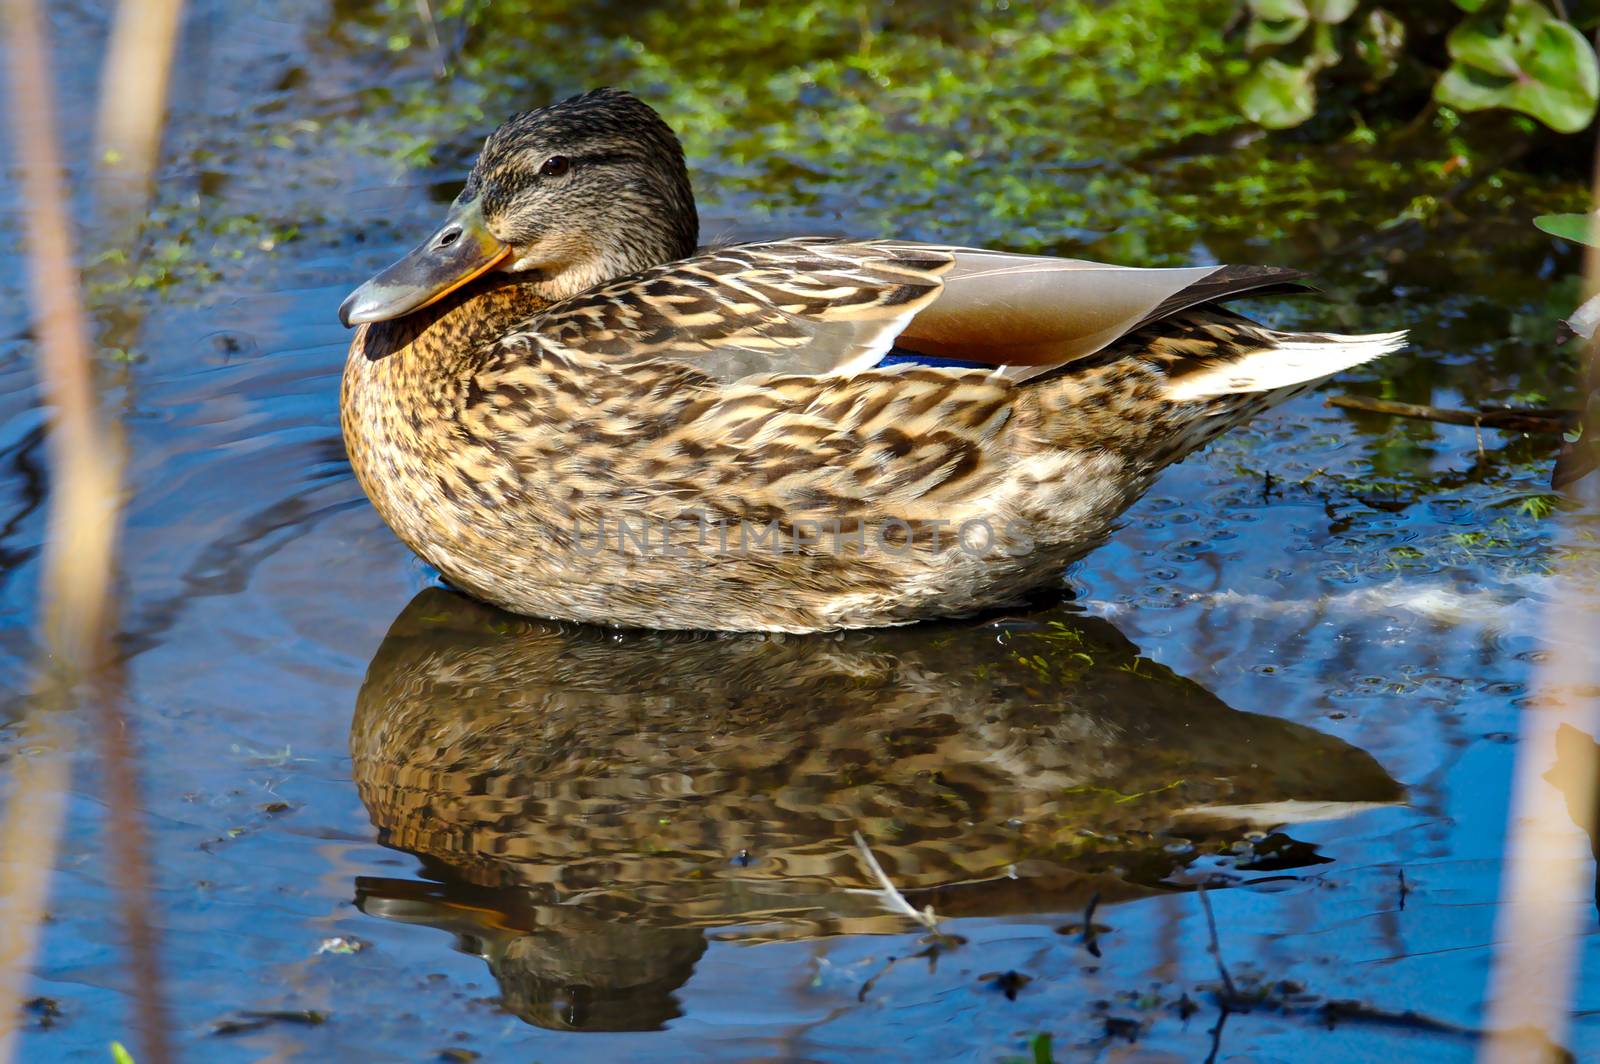 Female mallard duck chilling in the pond on a beautiful sunny day.